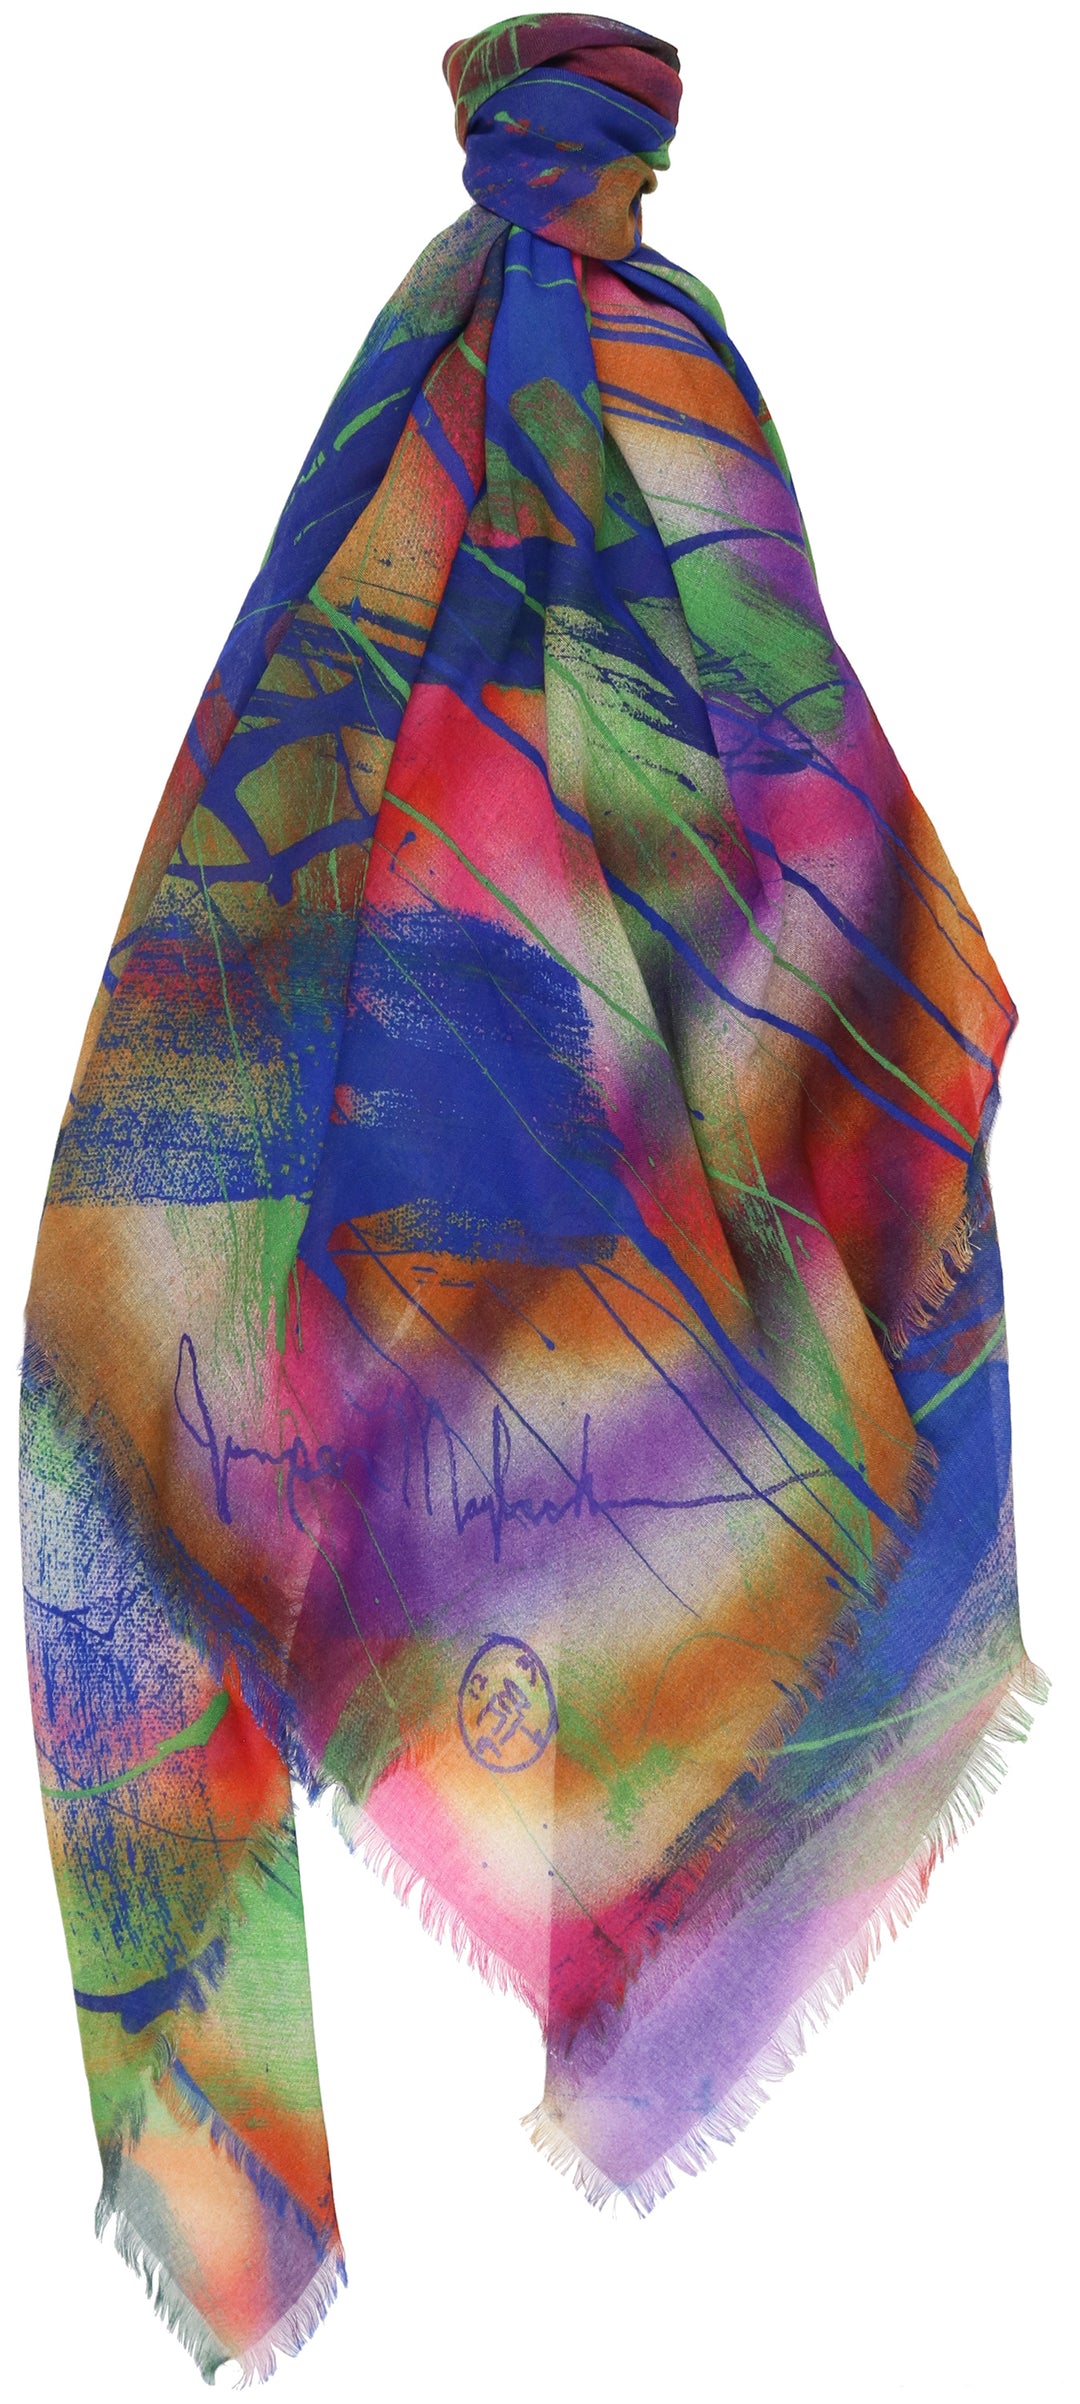 Jumper Maybach X FRAAS "Chromatic #1" Recycled Polyester Square Scarf